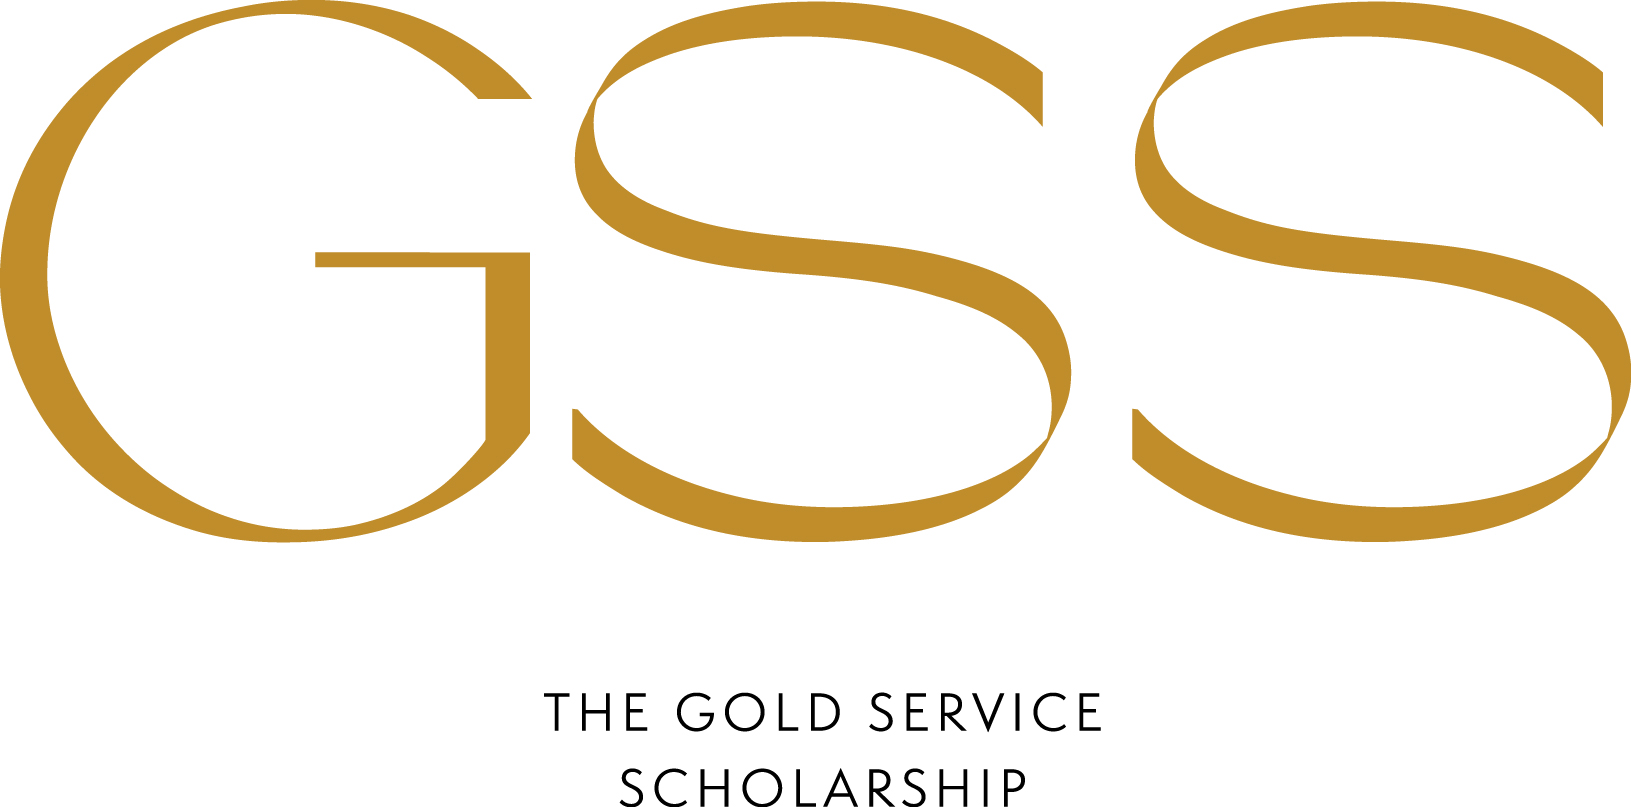 The Gold Service Scholarship